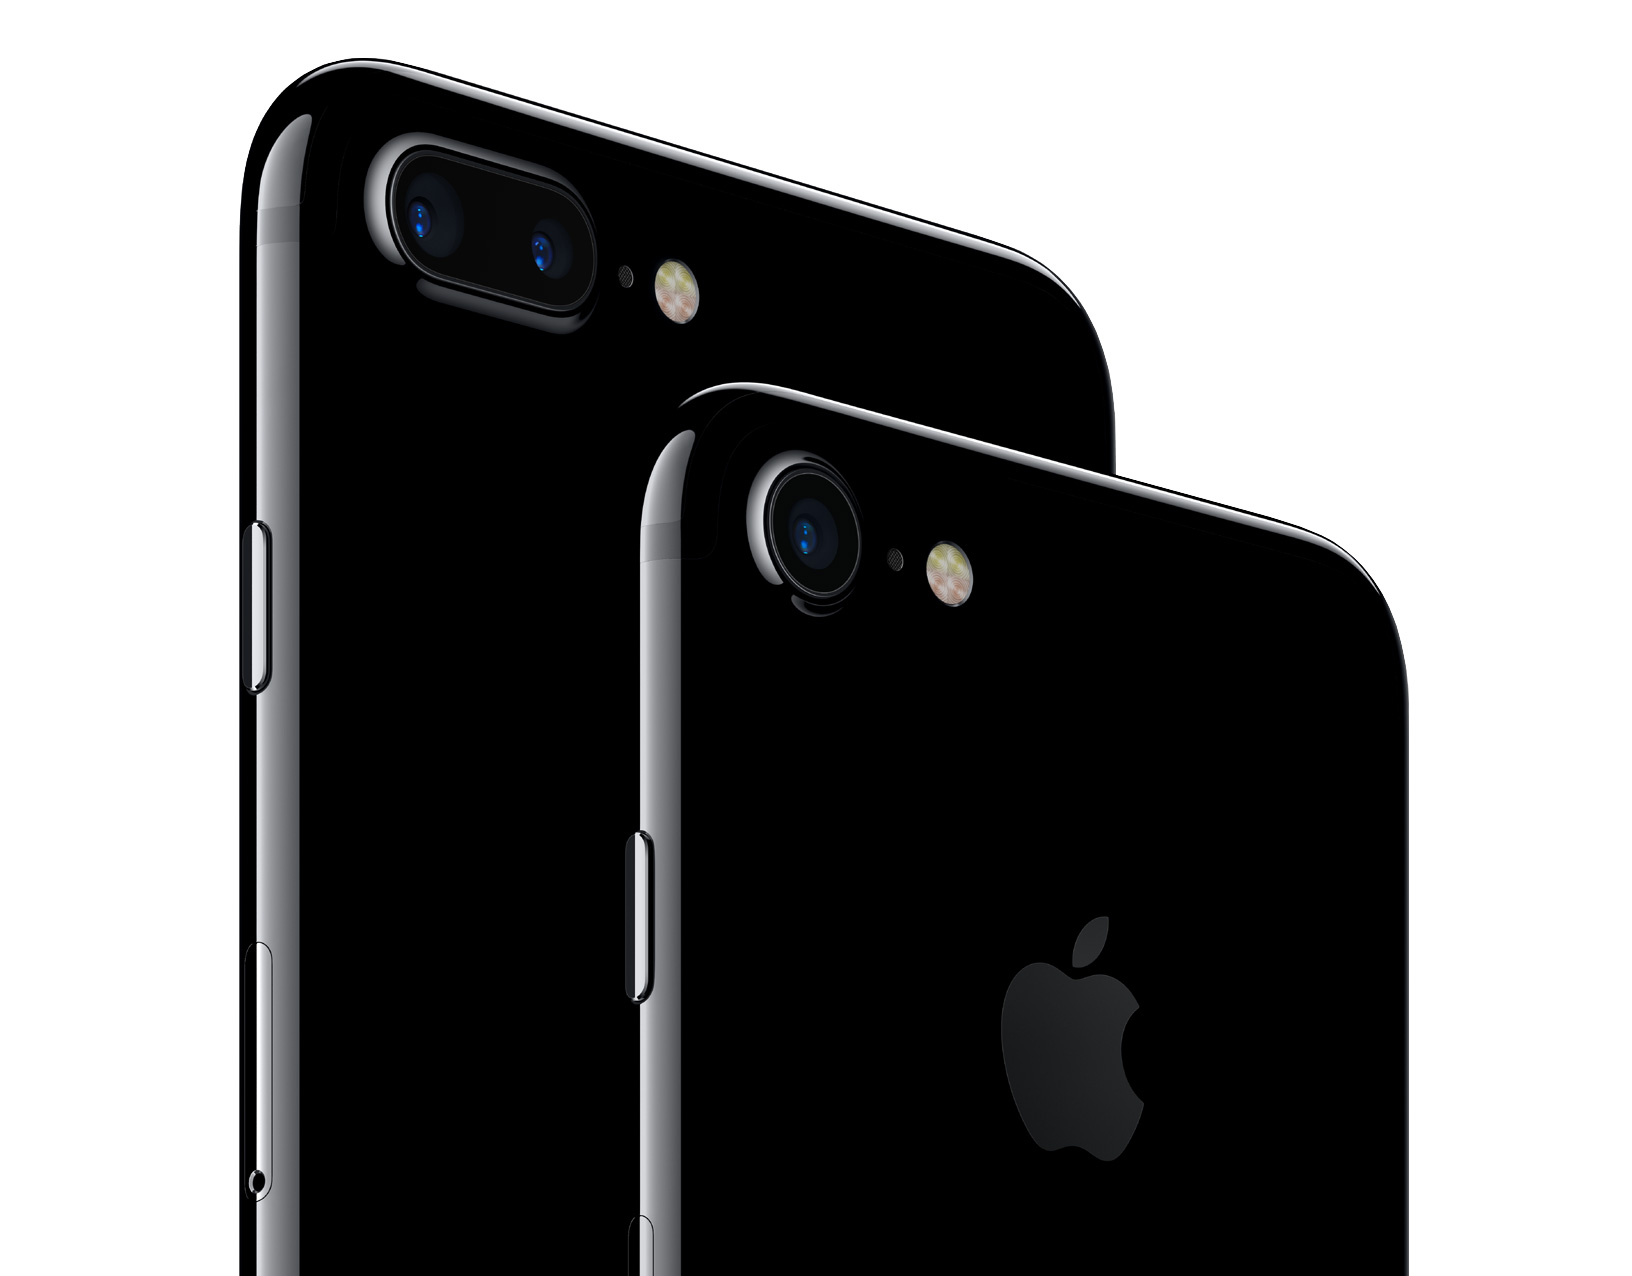 Apple Introduces iPhone 7 & iPhone 7 Plus, the Best, Most Advanced iPhone Ever